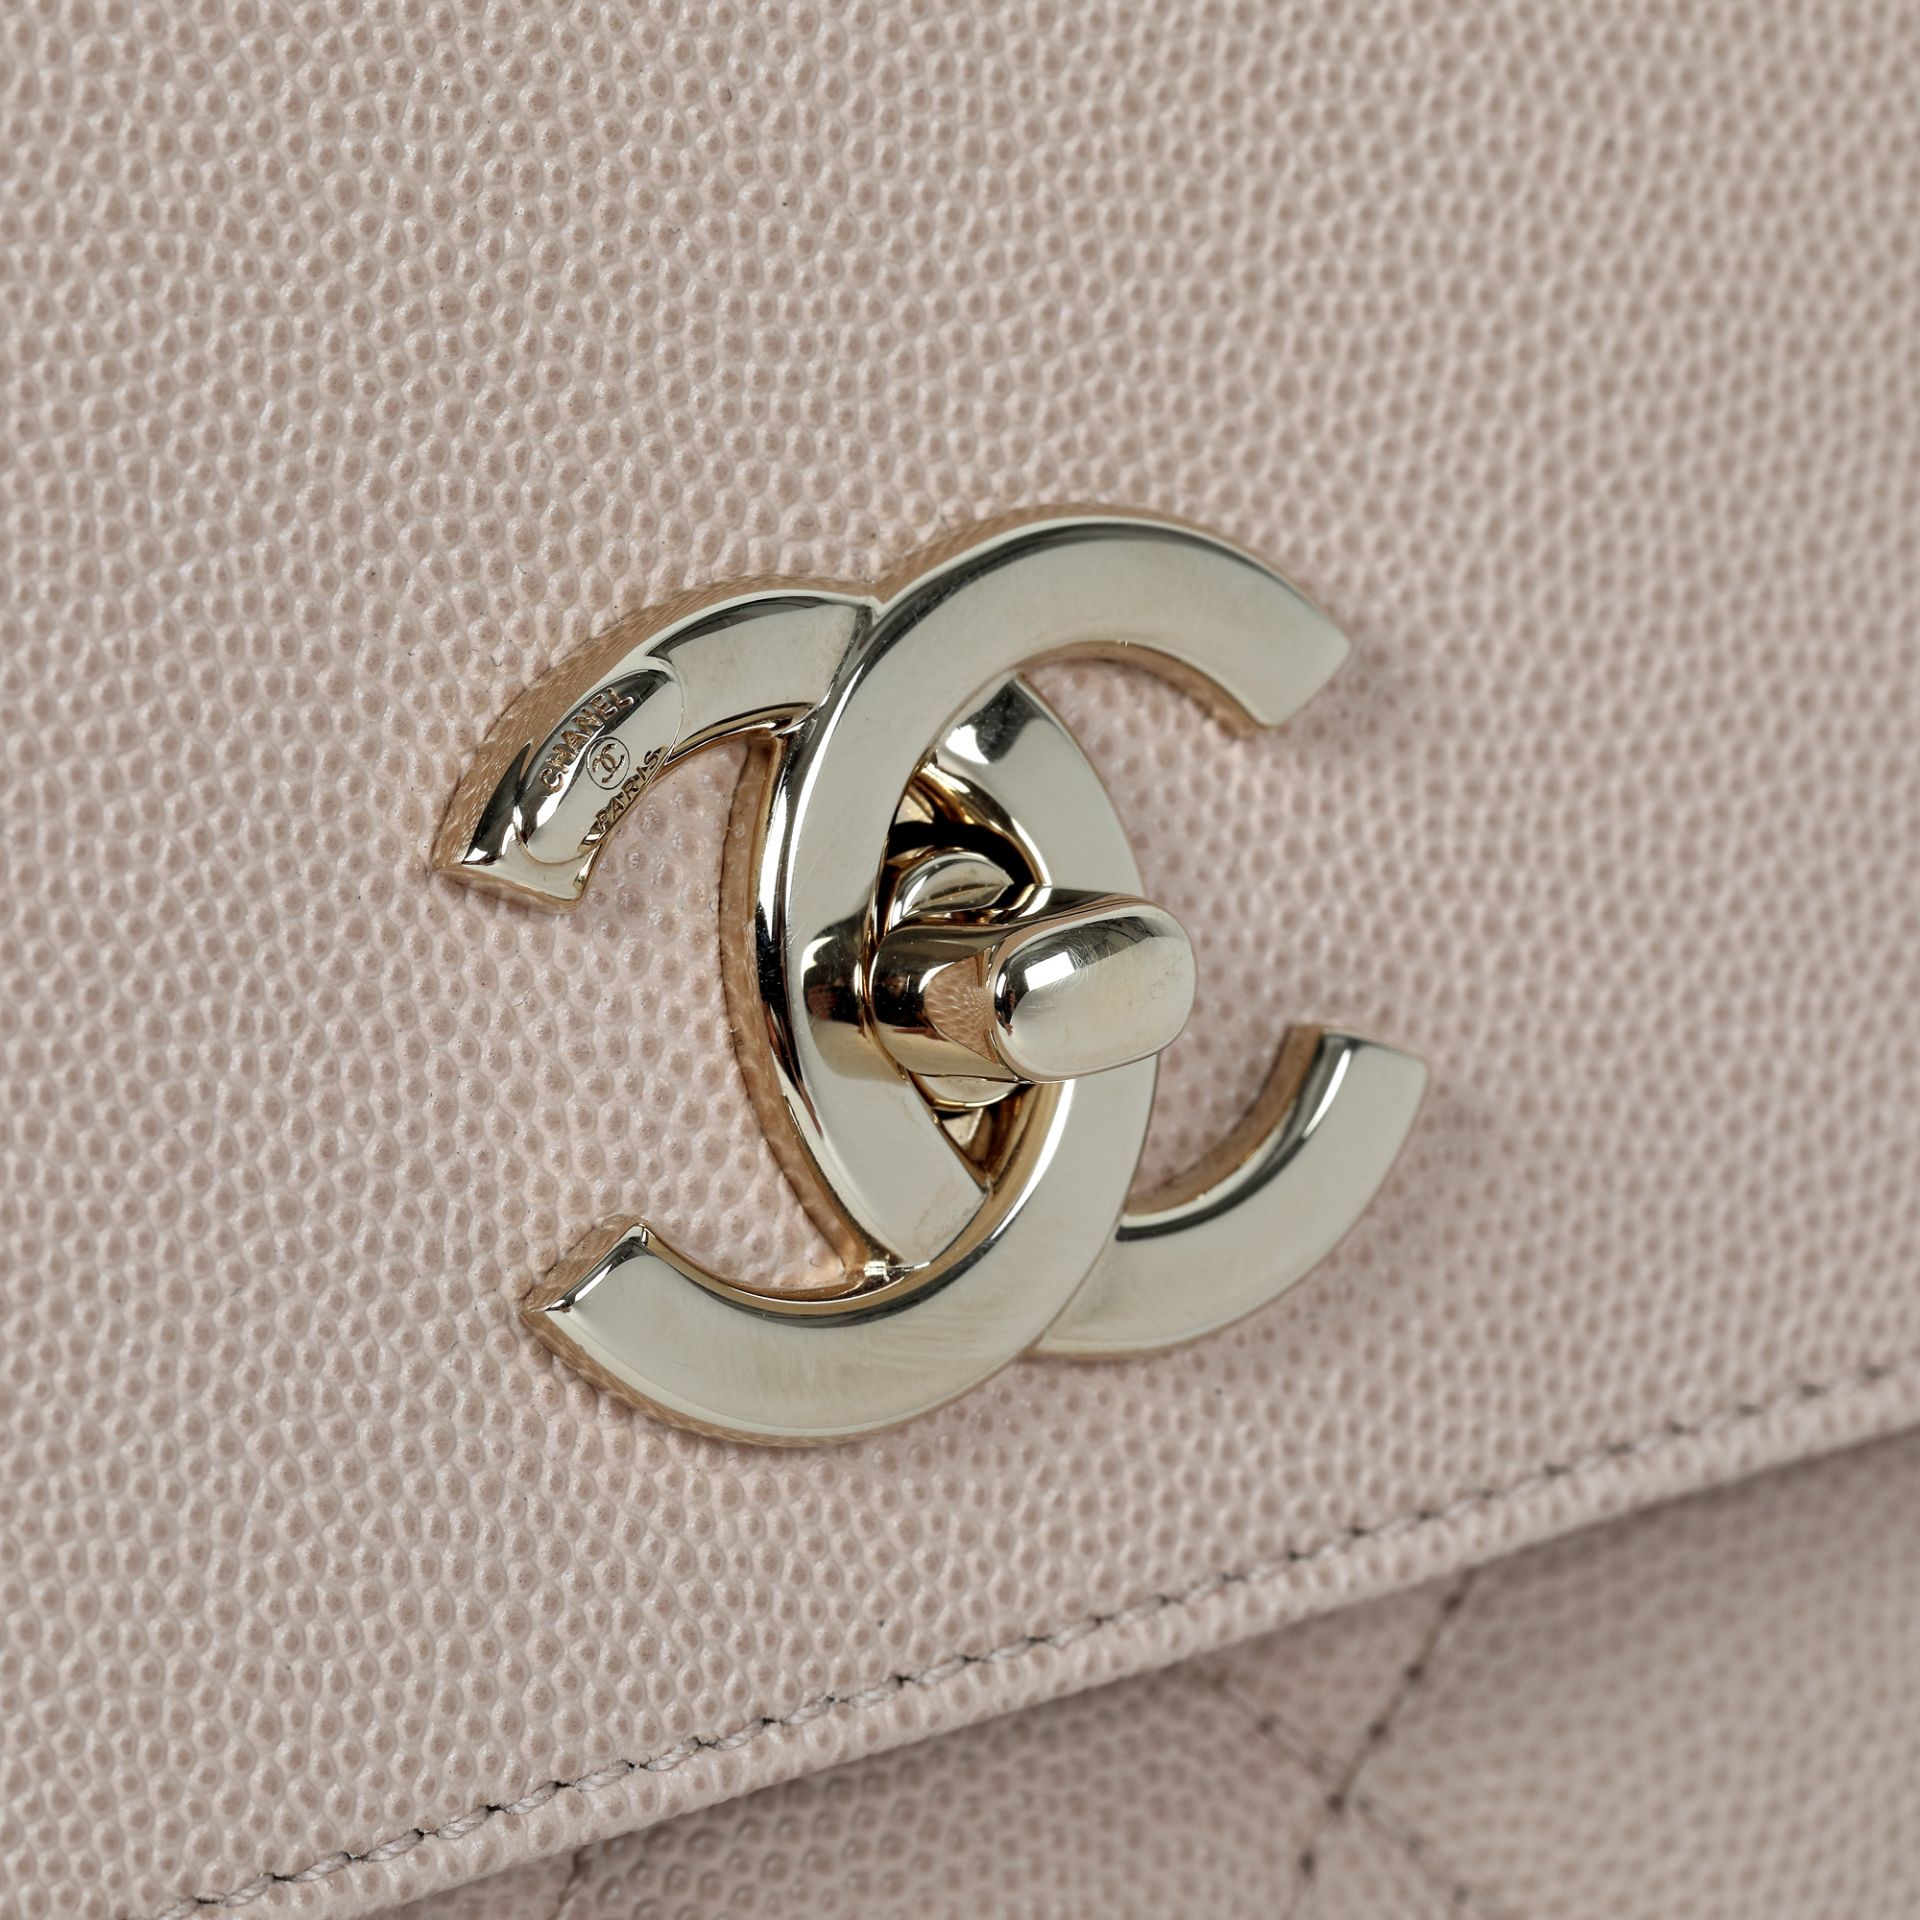 "Business Affinity Flap Bag" - Chanel bag, partially quilted Caviar leather, beige - Image 3 of 4